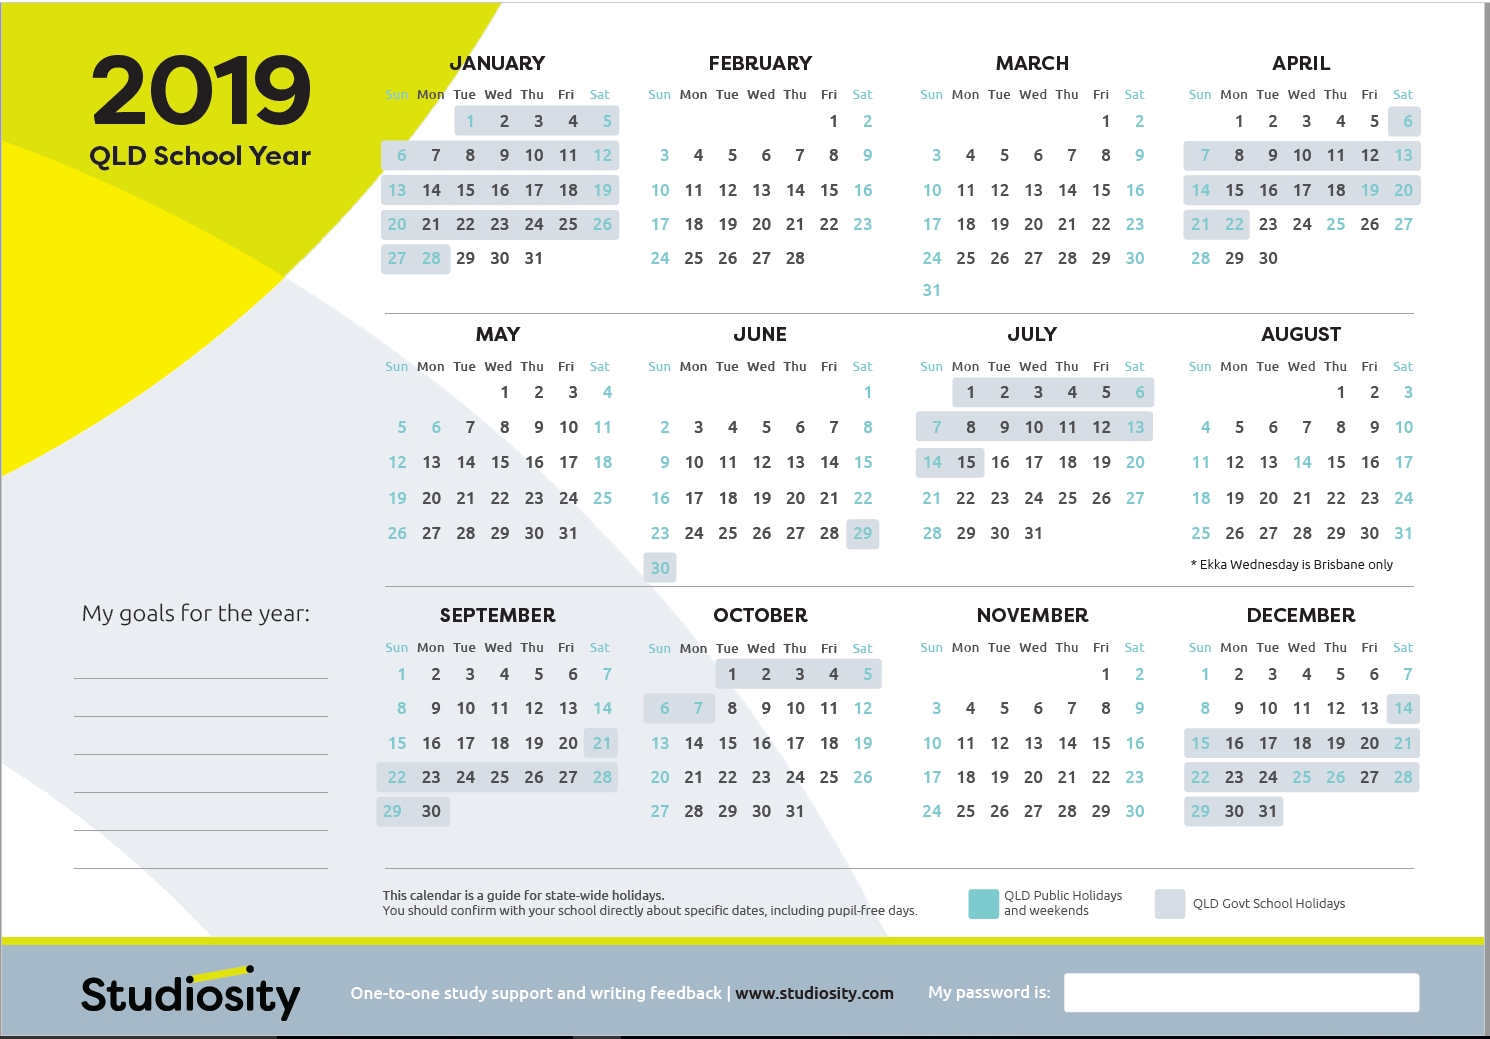 School Terms And Public Holiday Dates For Qld In 2019 | Studiosity E Rivers School Calendar